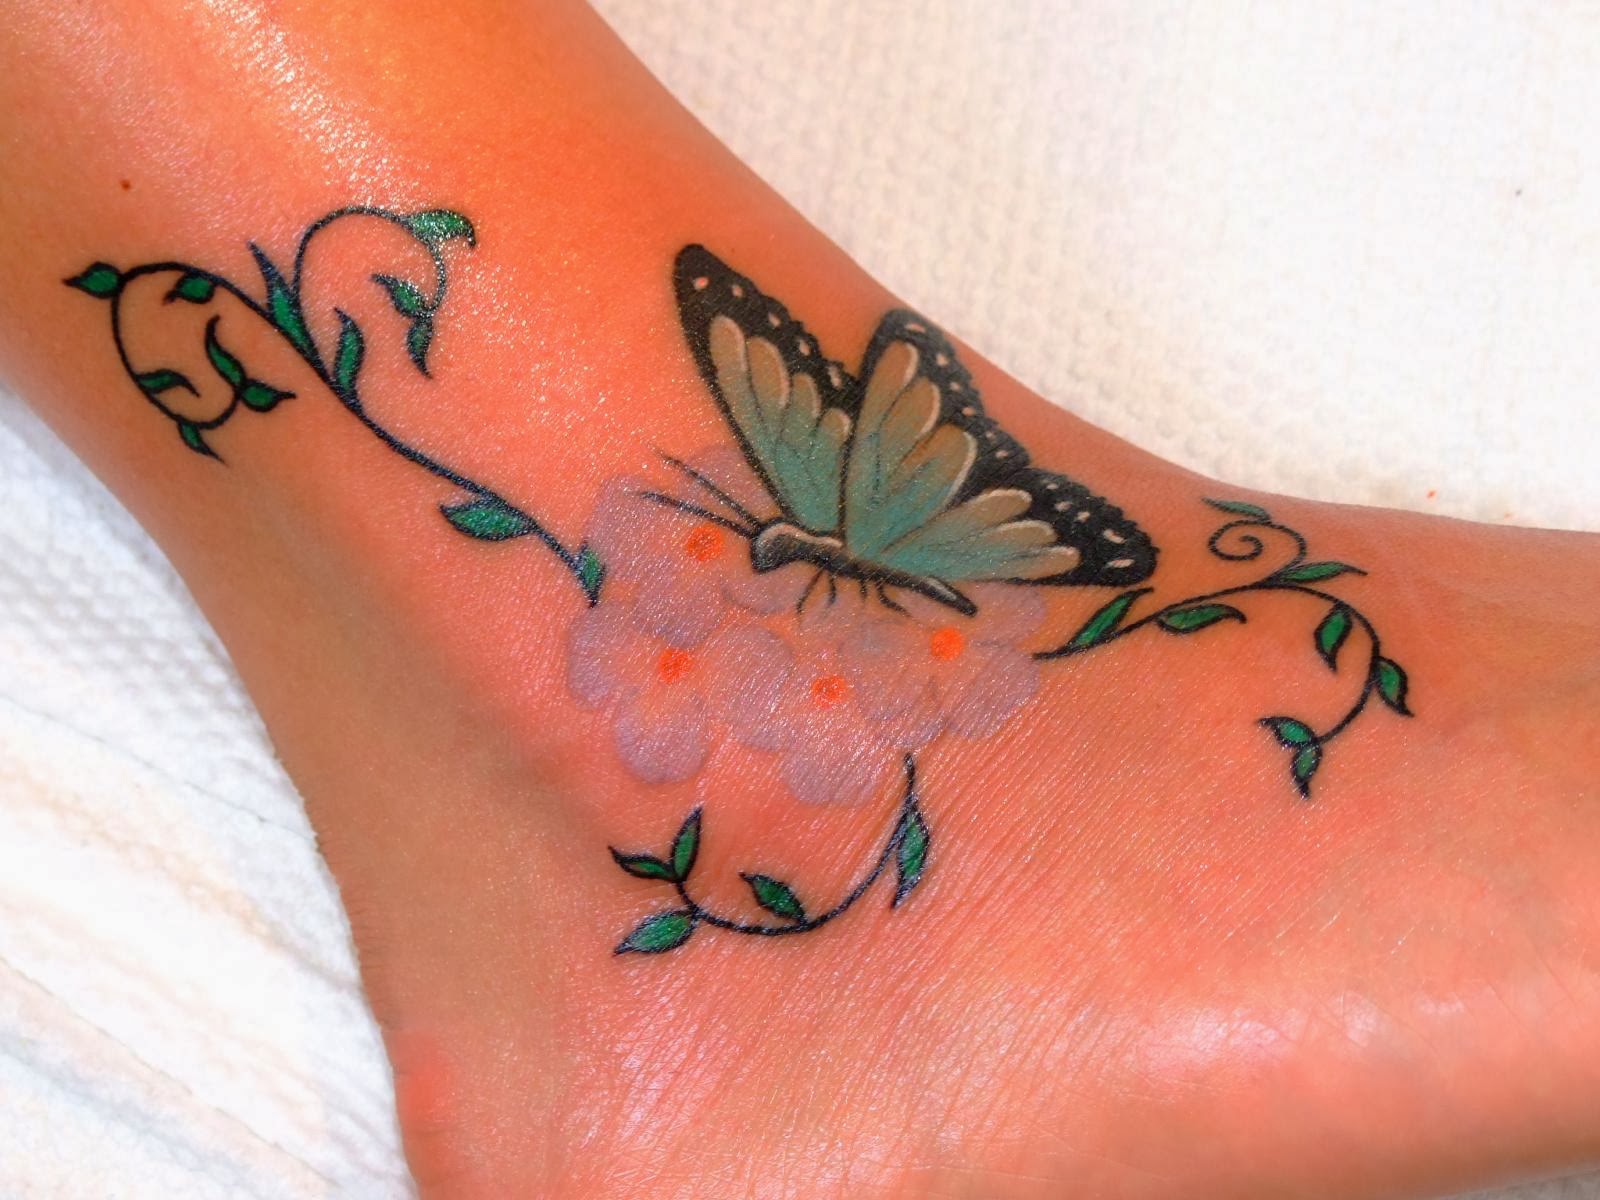 Fashion Tips For All: Ankle Tattoos for Women 2013